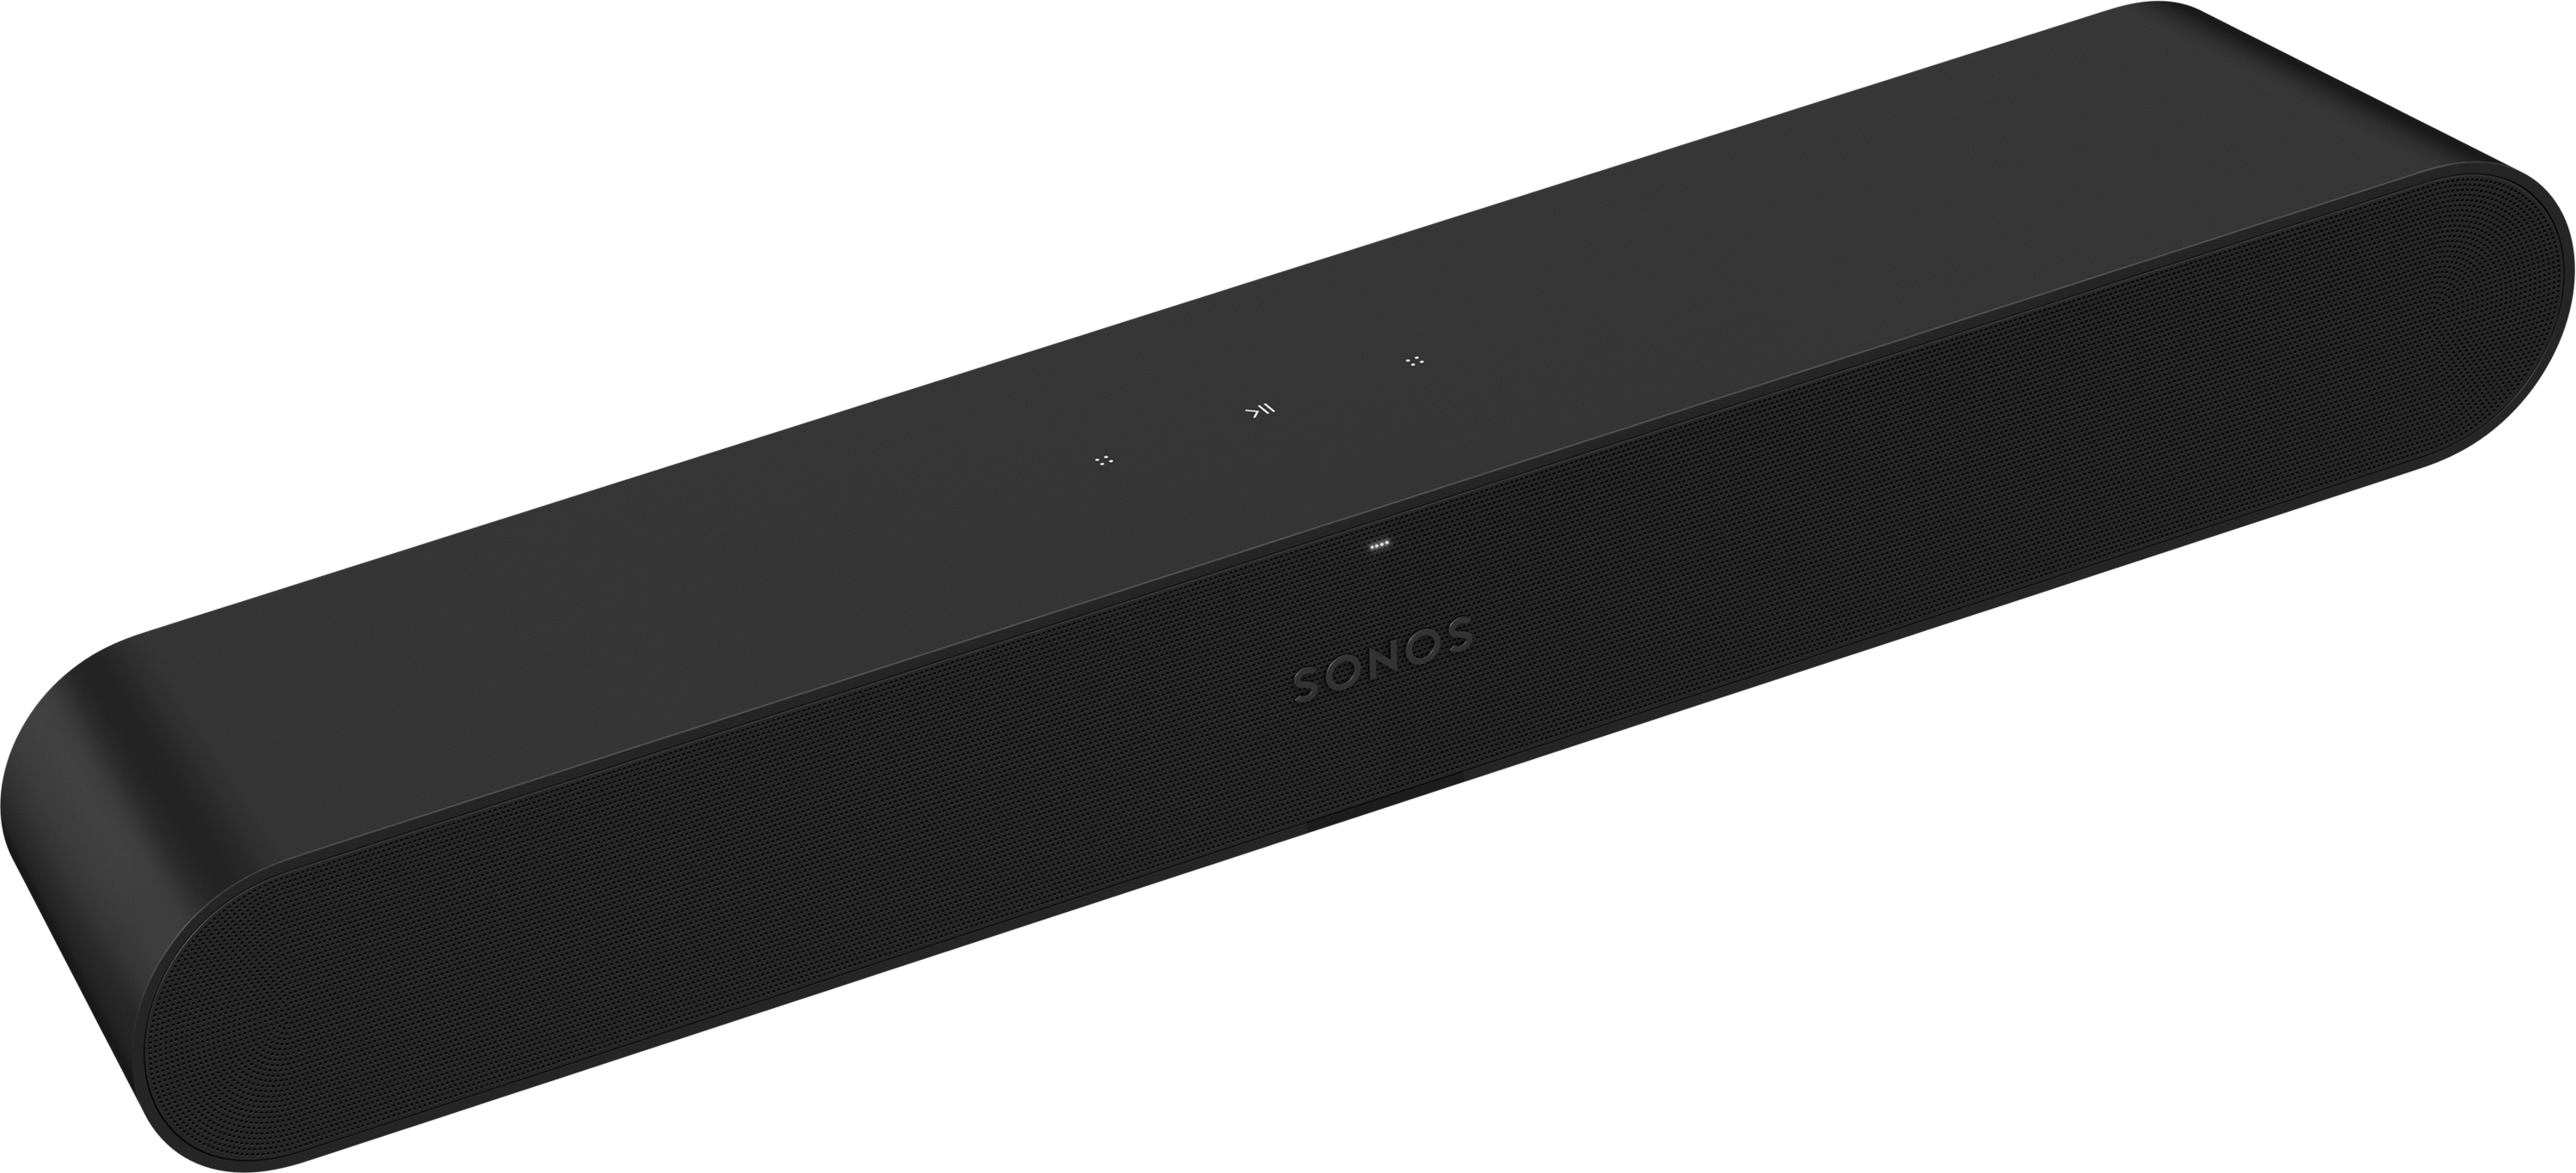 https://www-dw-prd.sonos.com/on/demandware.static/-/Sites-sonos-master/default/images/products/ray/ray-angle-black.png